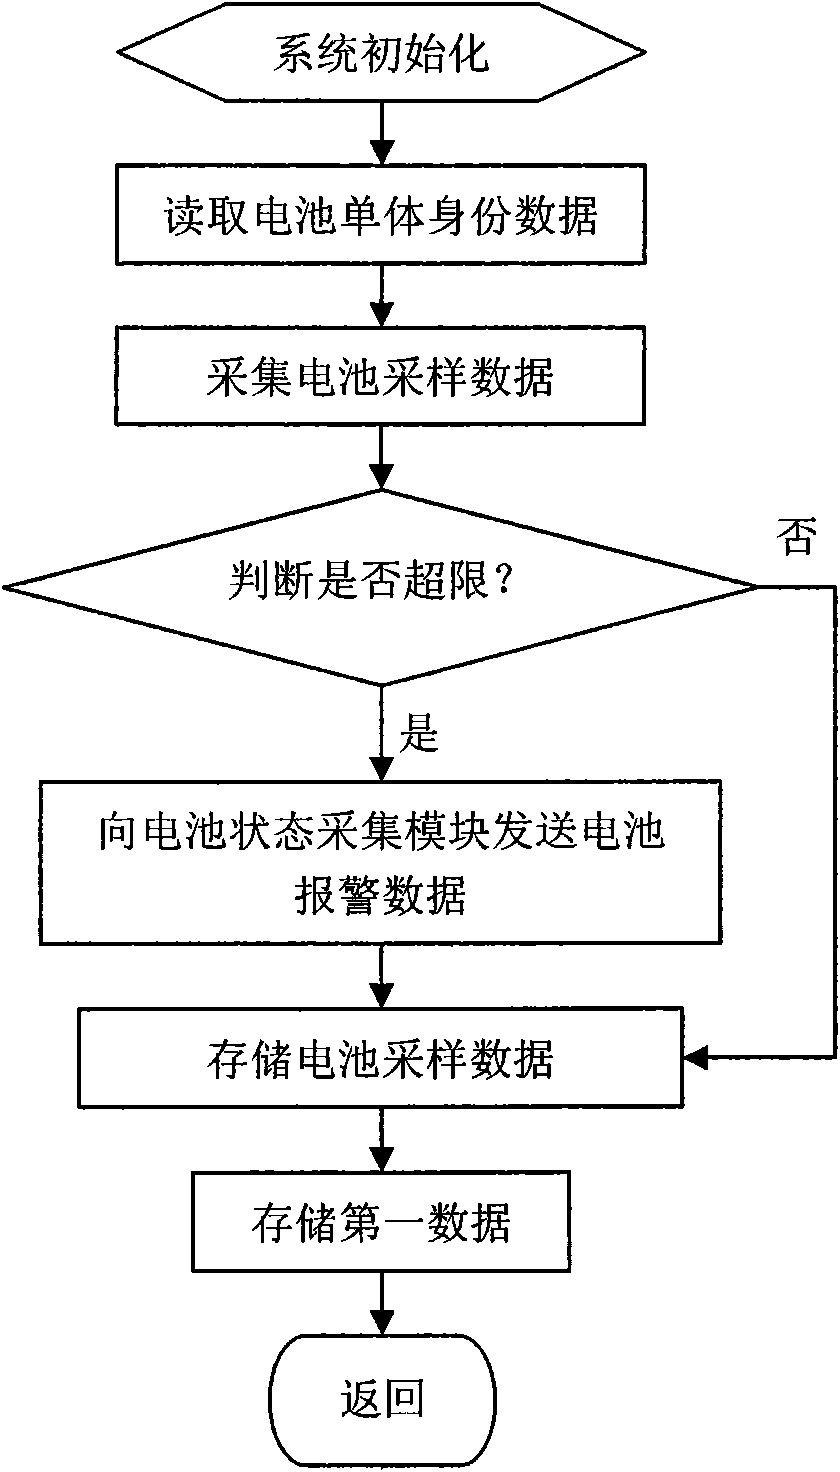 System for managing continuous status of batteries of electric motorcar